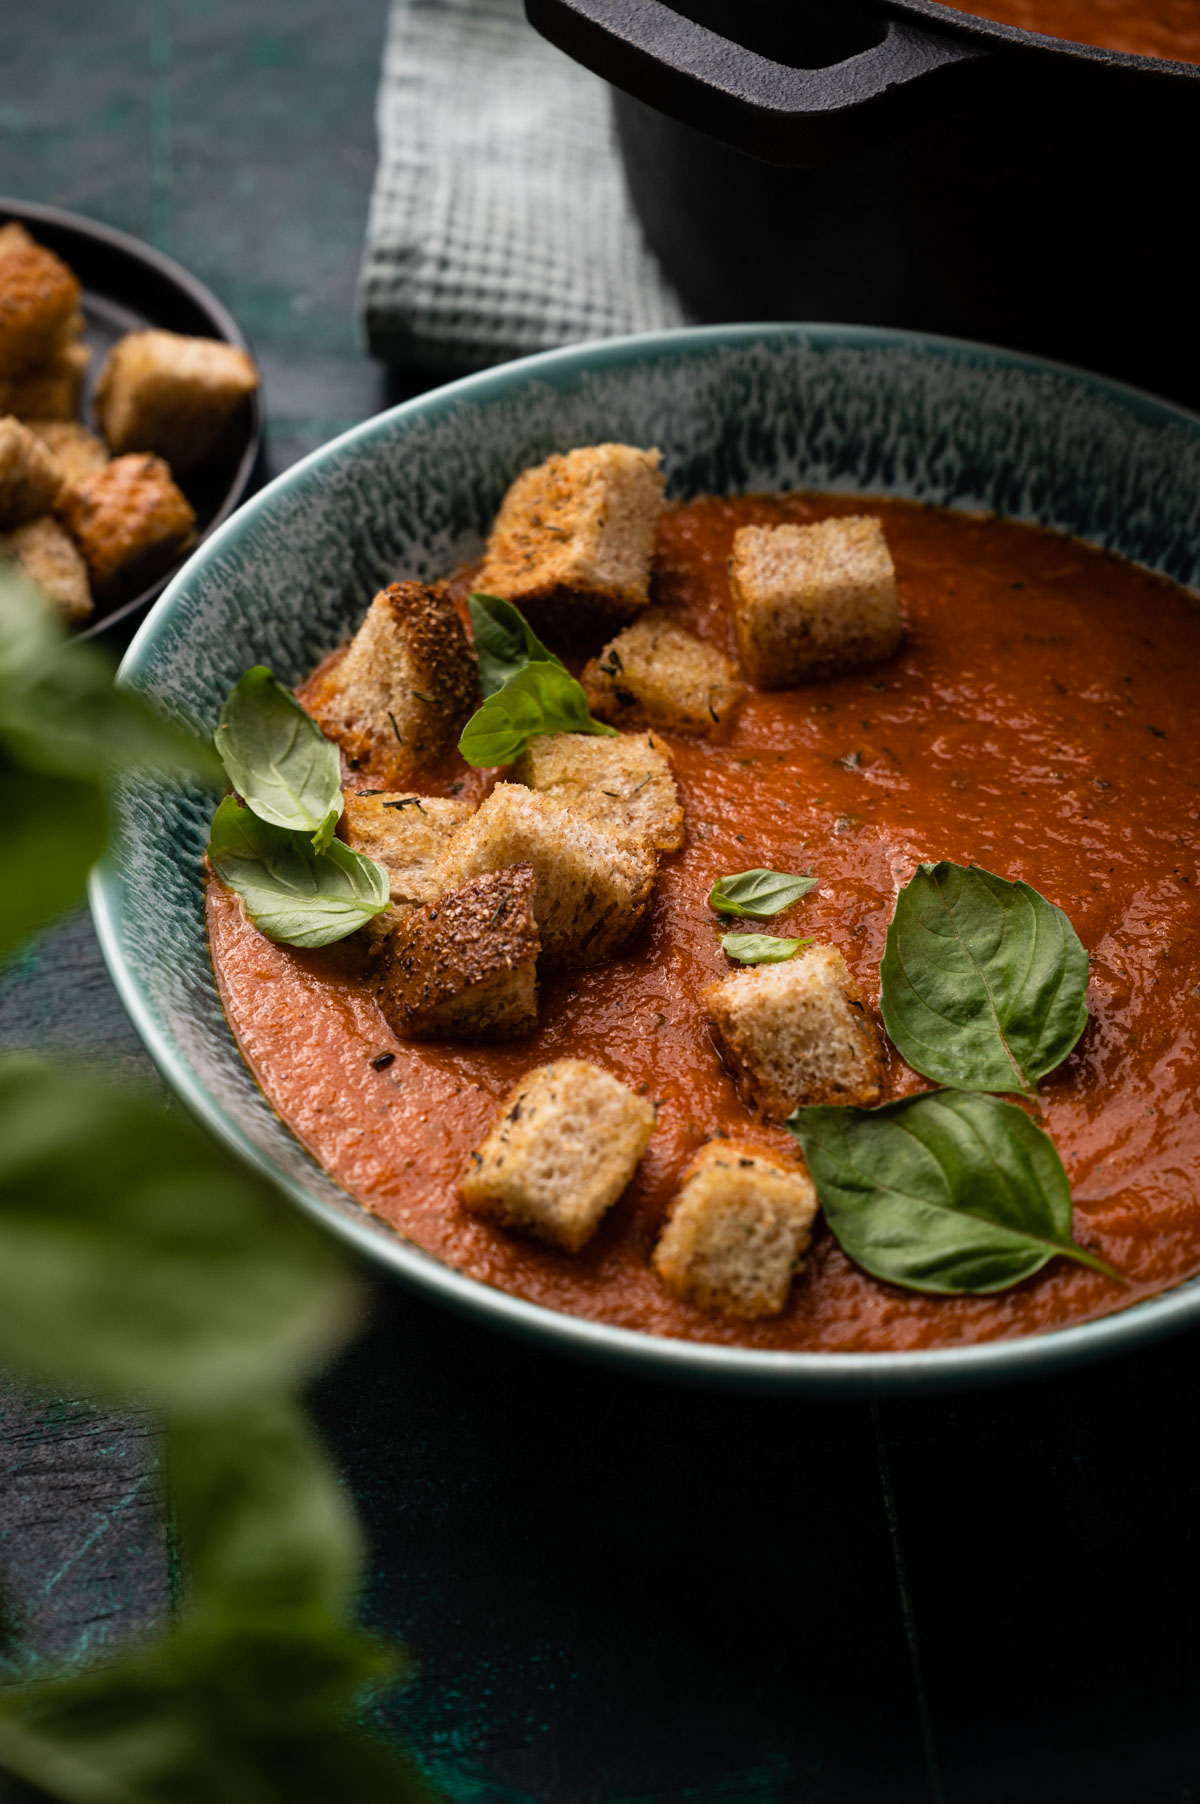 A bowl of tomato soup garnished with fresh basil and croutons, next to a cast iron pot, on a dark, textured surface.